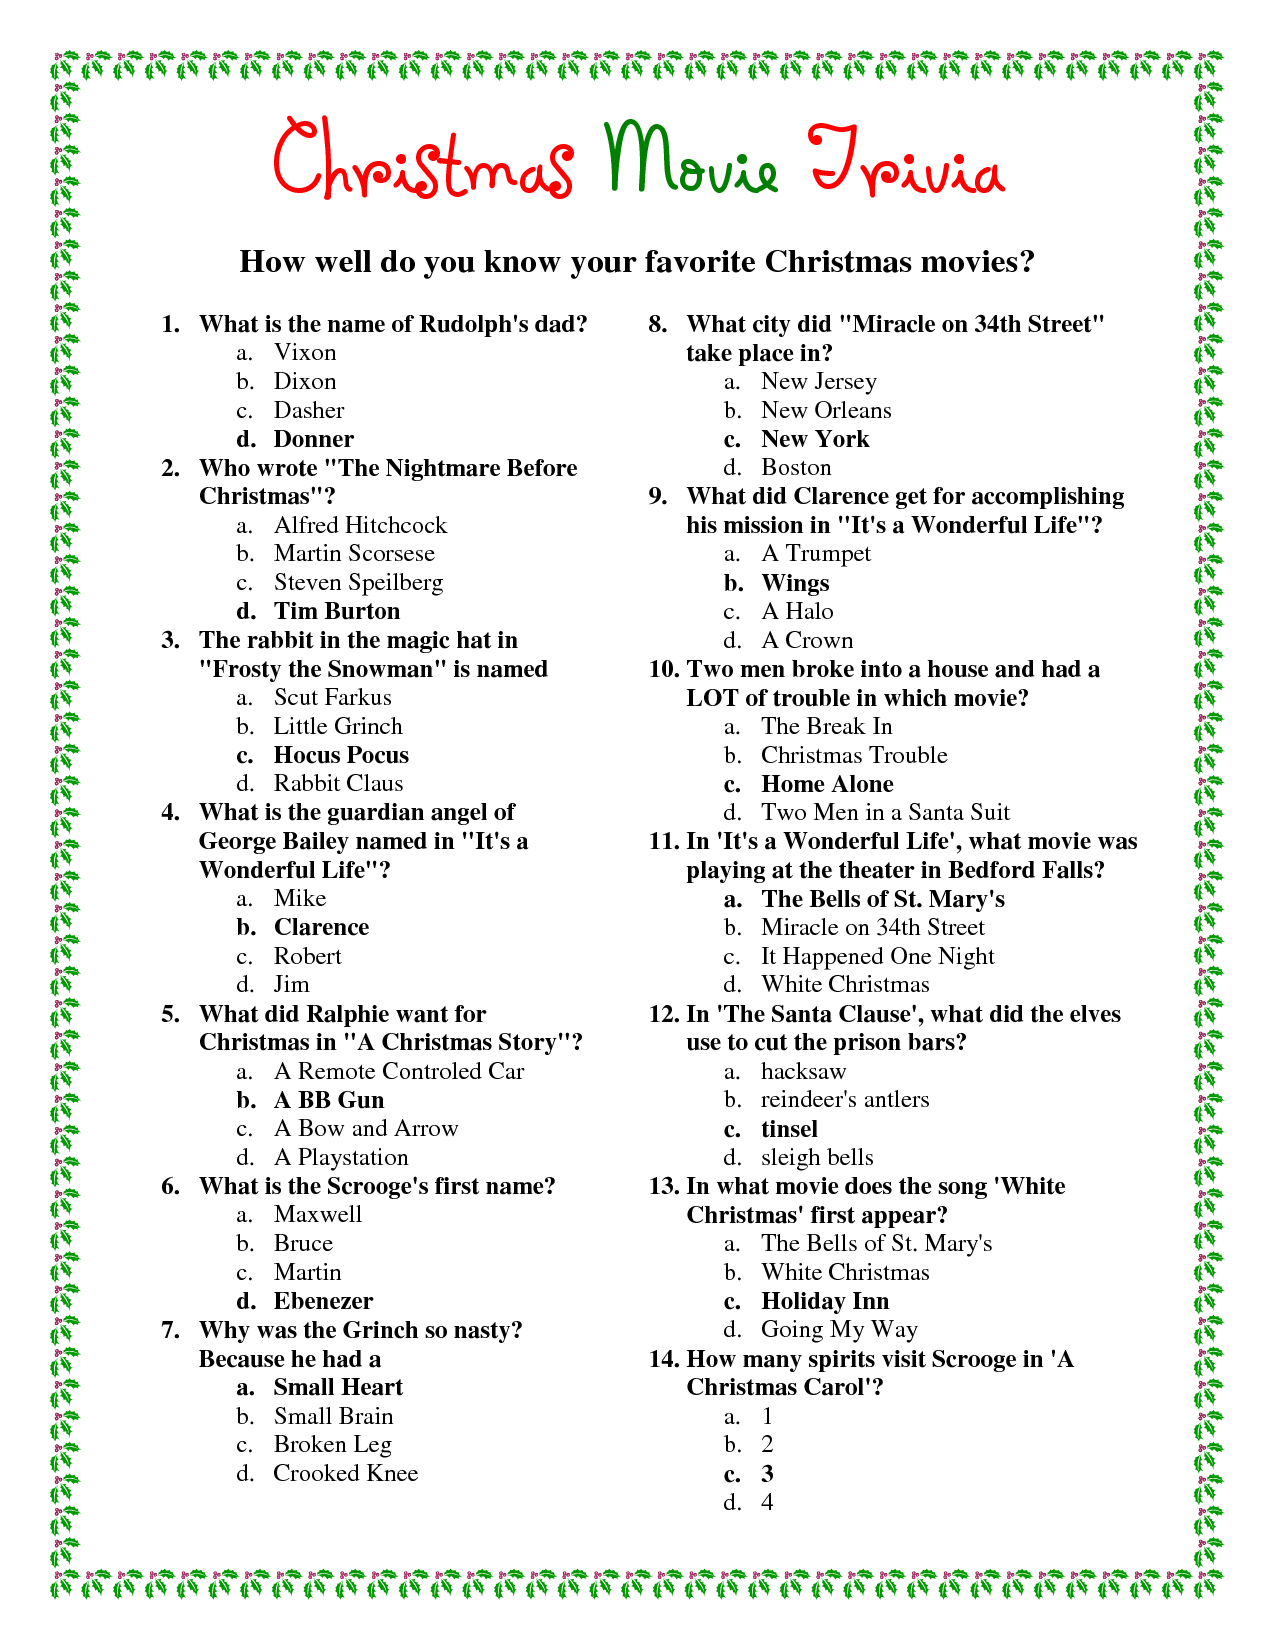 Ideas Collection Easy Christmas Trivia Questions And Answers - Free Printable Christmas Trivia Quiz